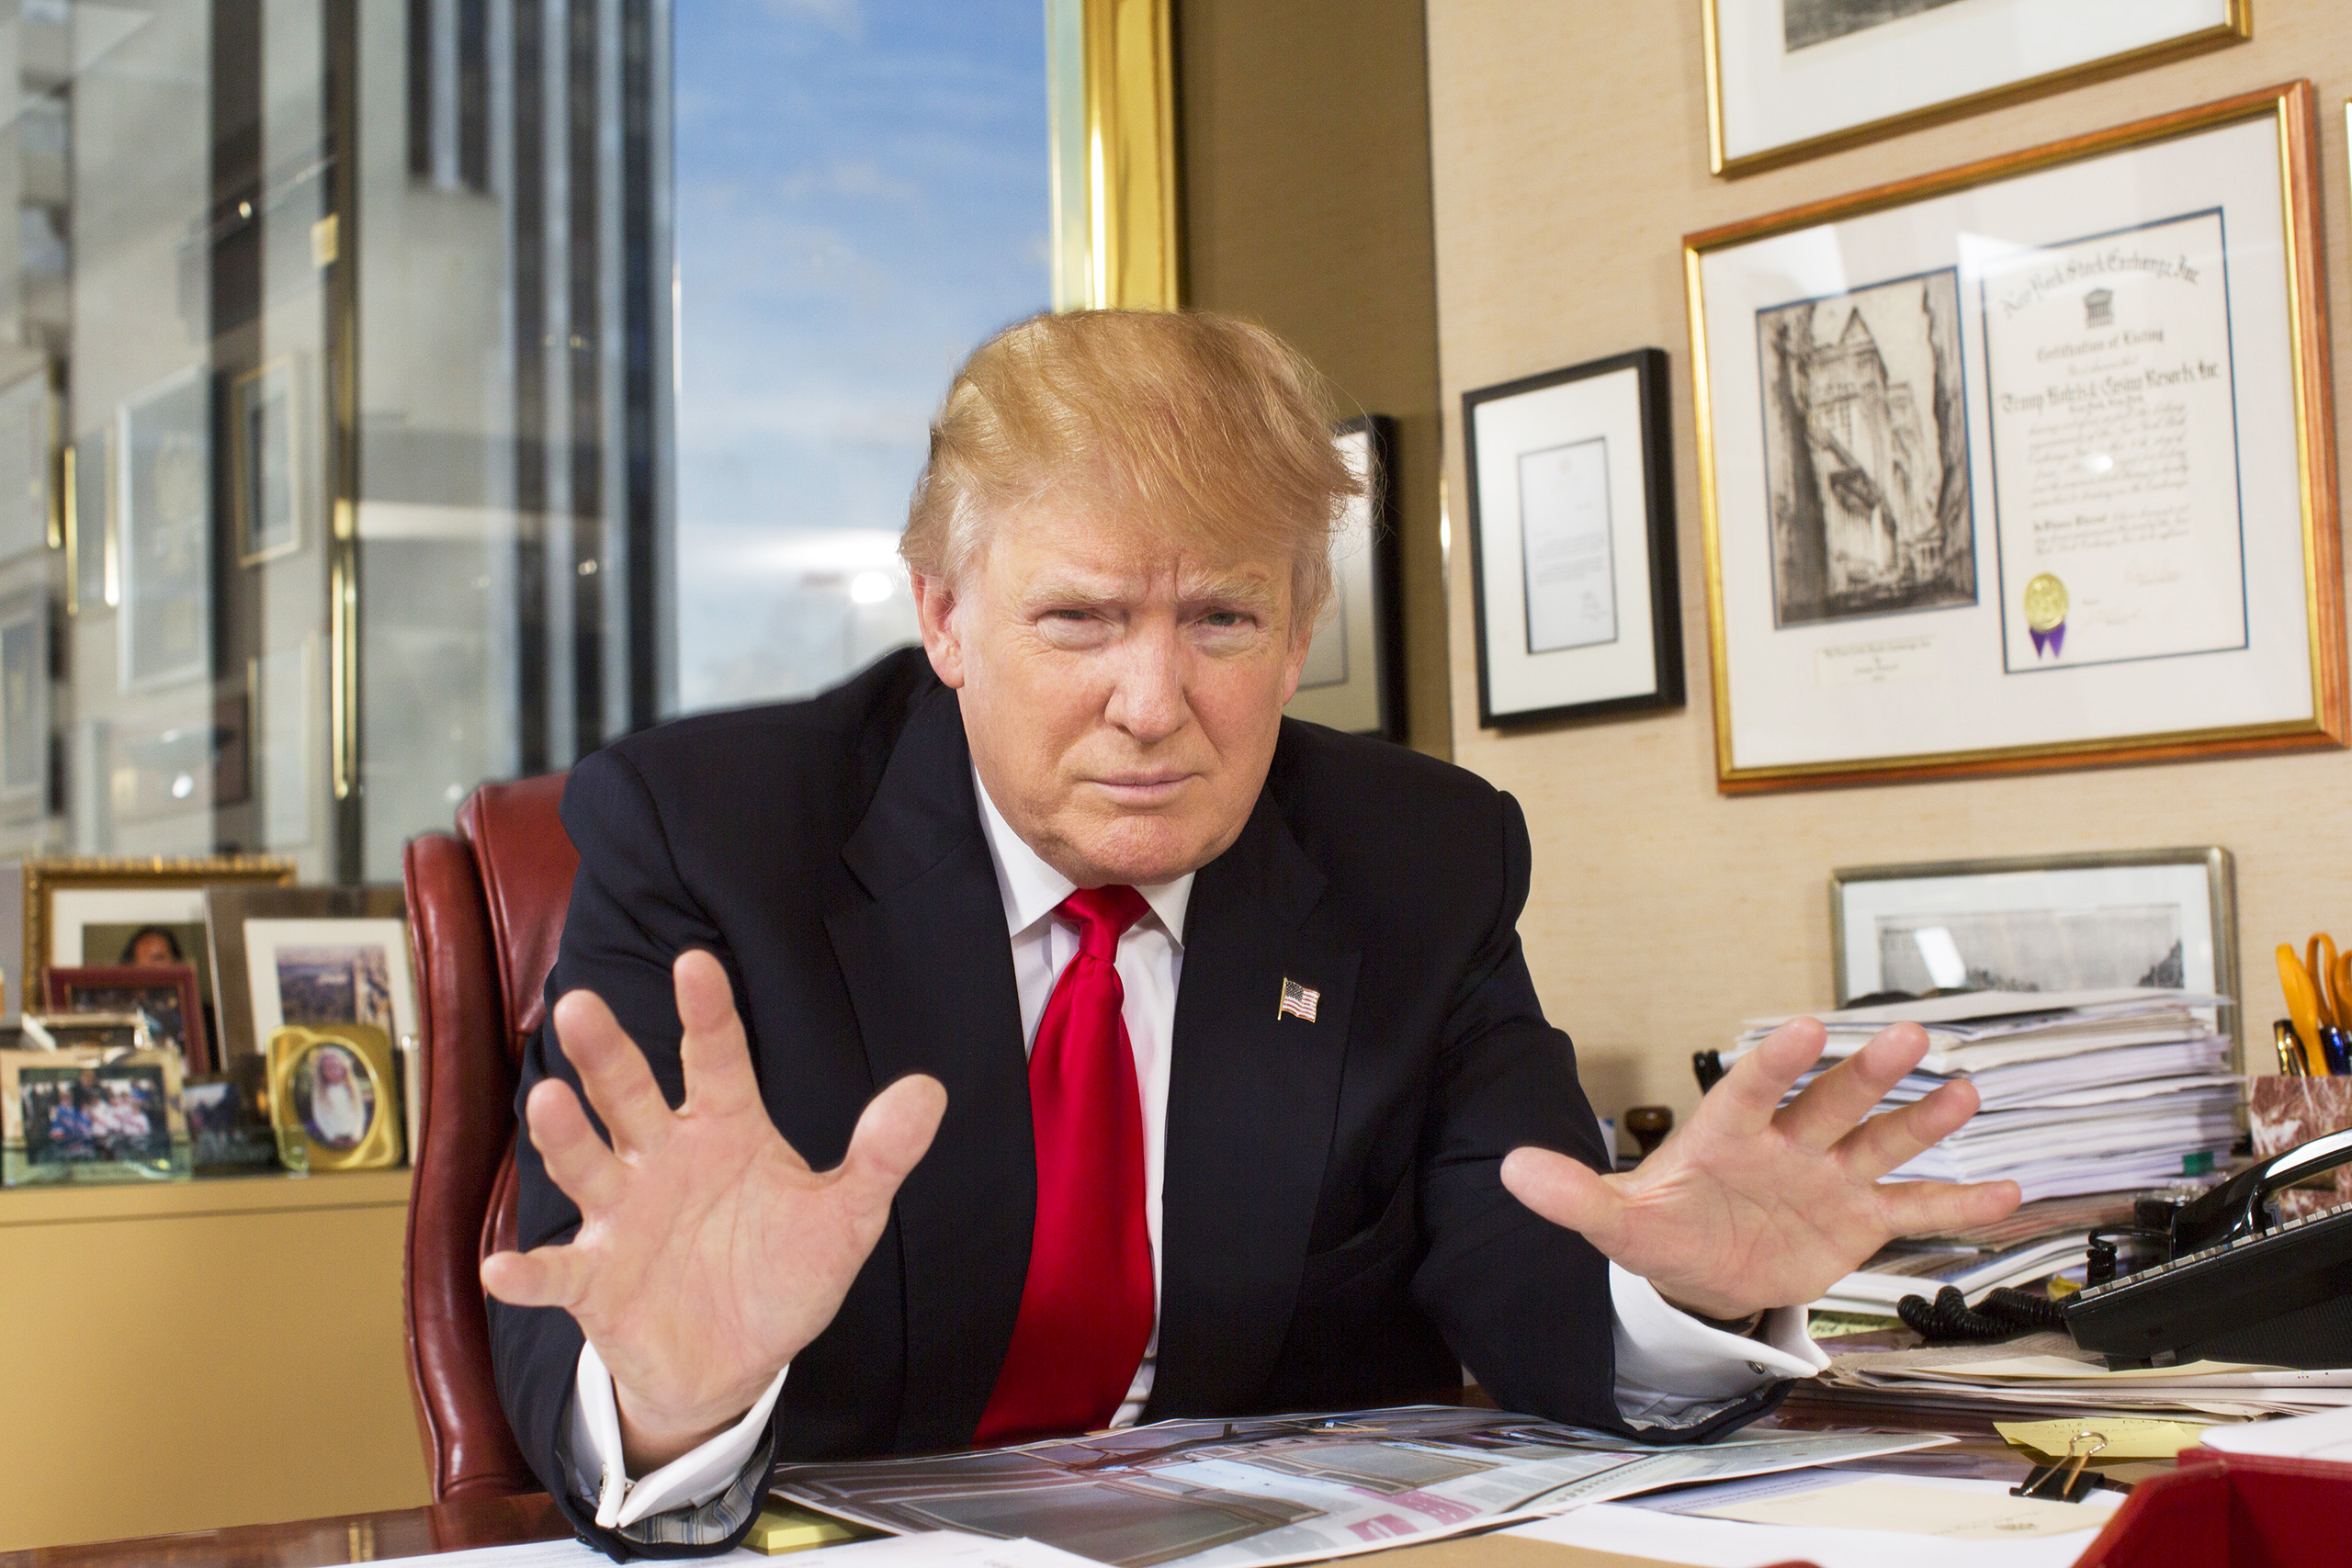 Republican presidential candidate Donald Trump in his office at Trump Tower in New York City on July 11, 2016.